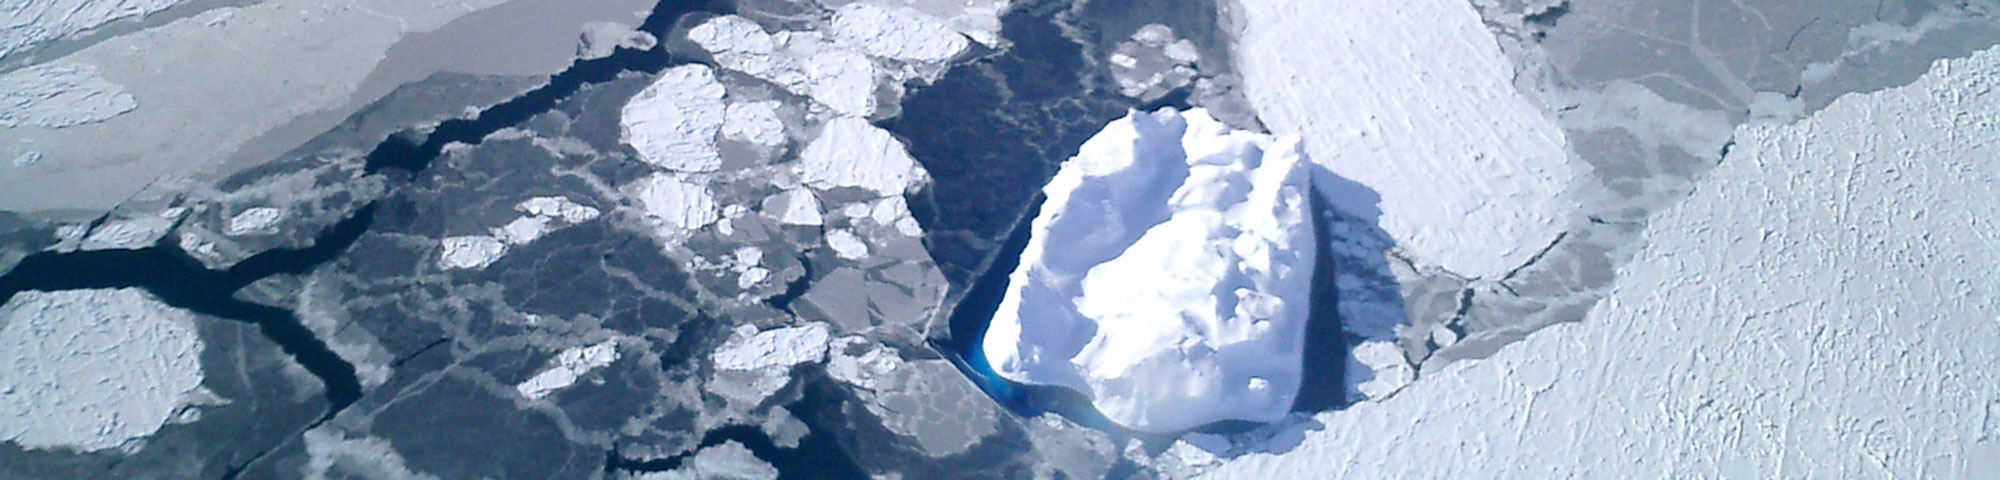 Nila blended into snow-covered sea ice, Anthony Petty, NSIDC